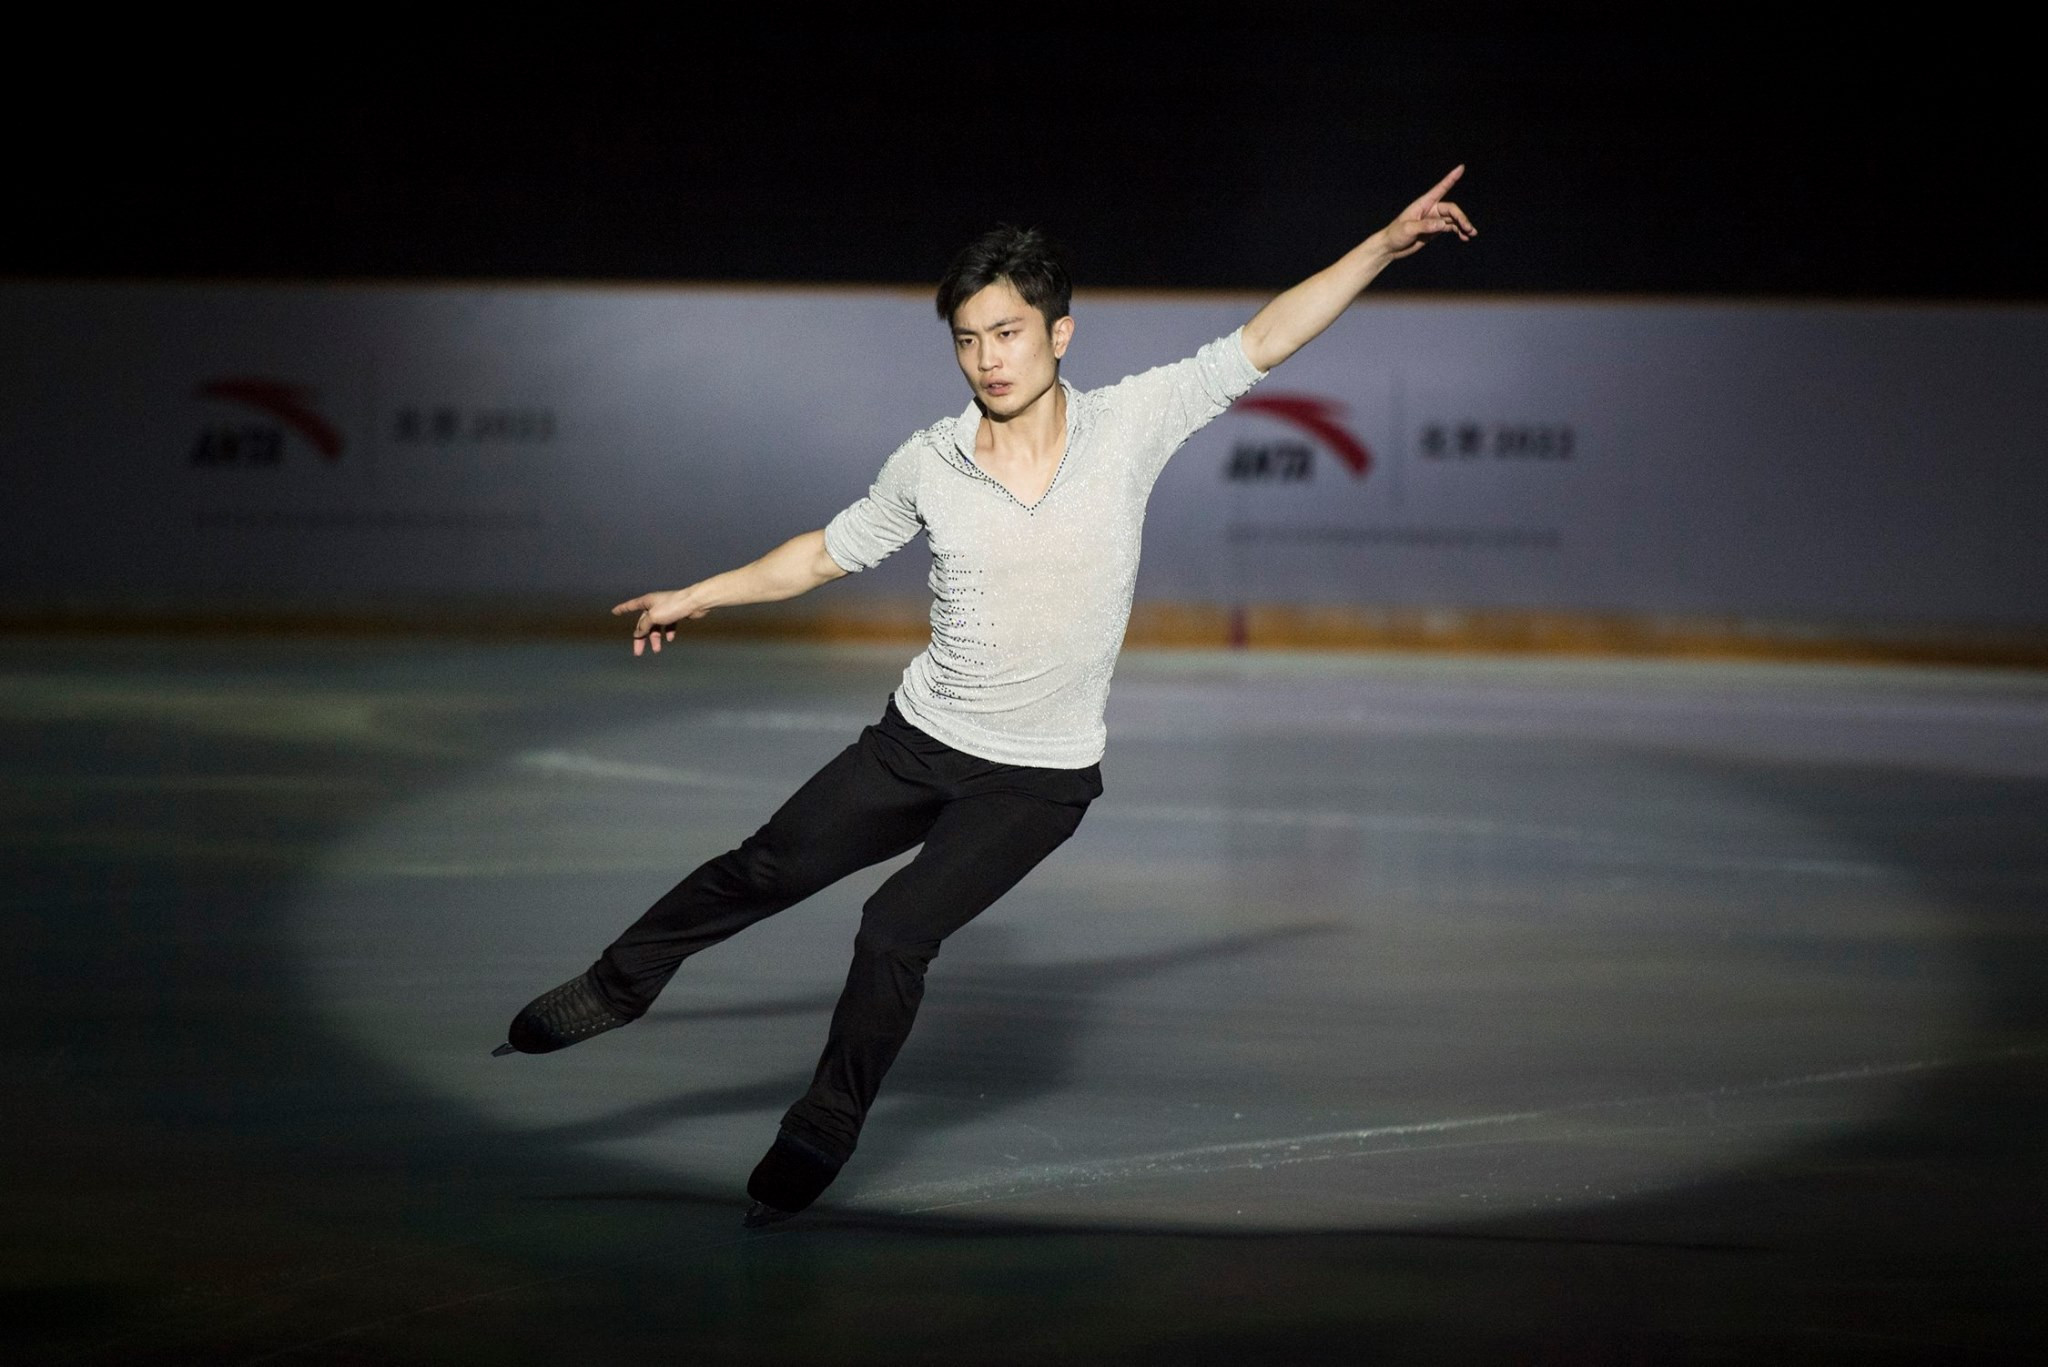 A special skating show was staged to celebrate ANTA's new sponsorship deal with Beijing 2022 ©Beijing 2022